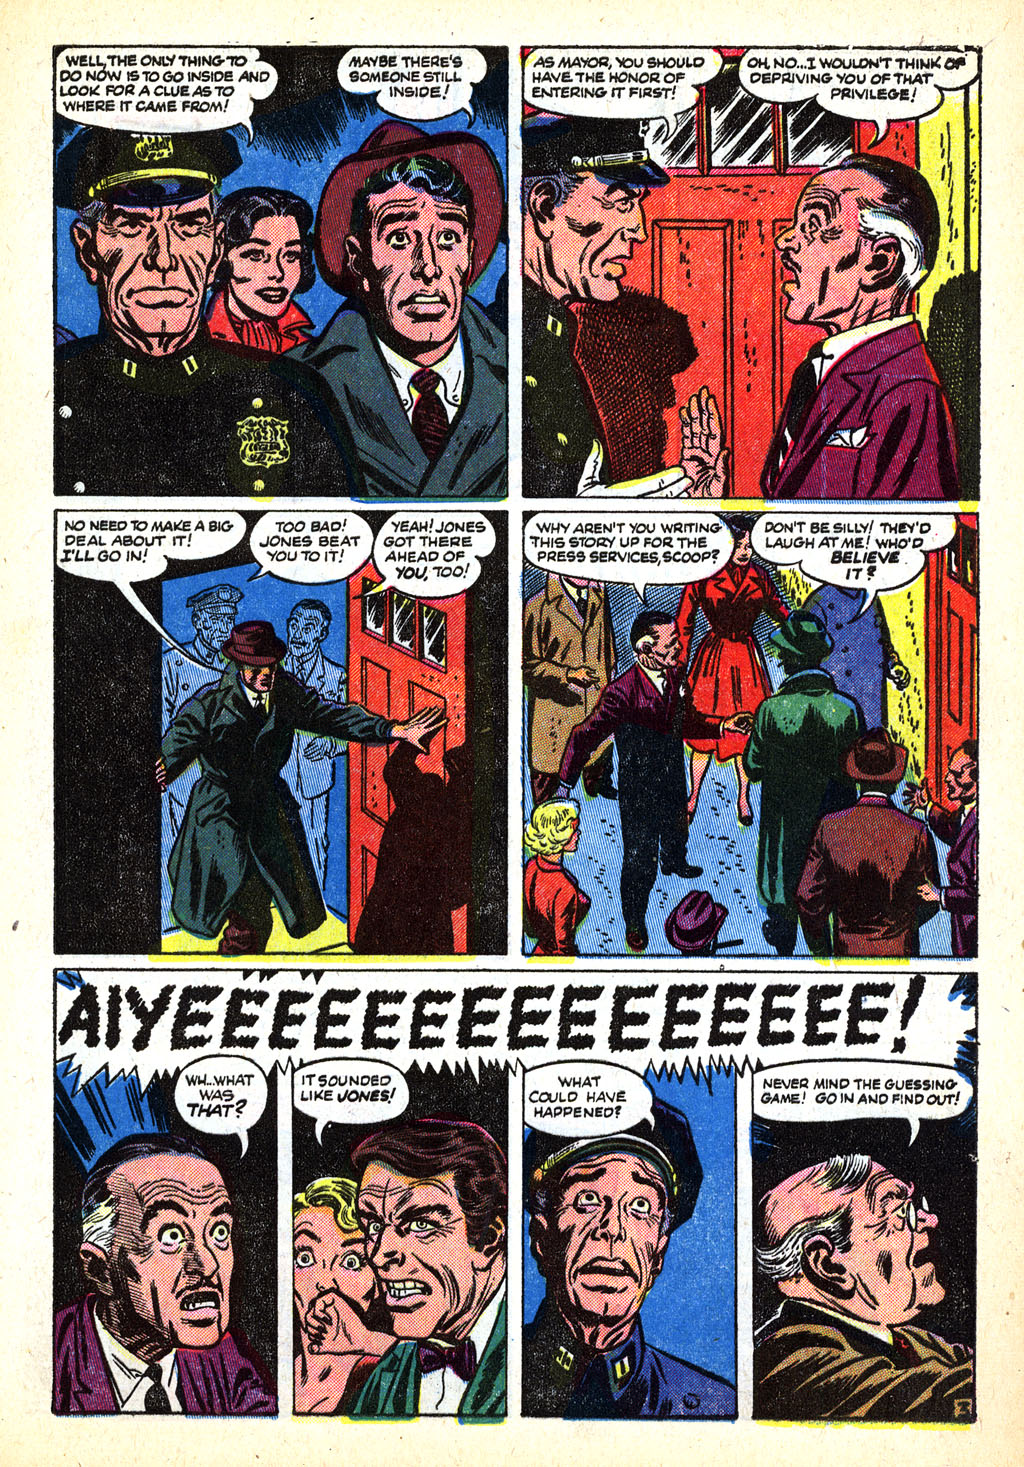 Marvel Tales (1949) 112 Page 4